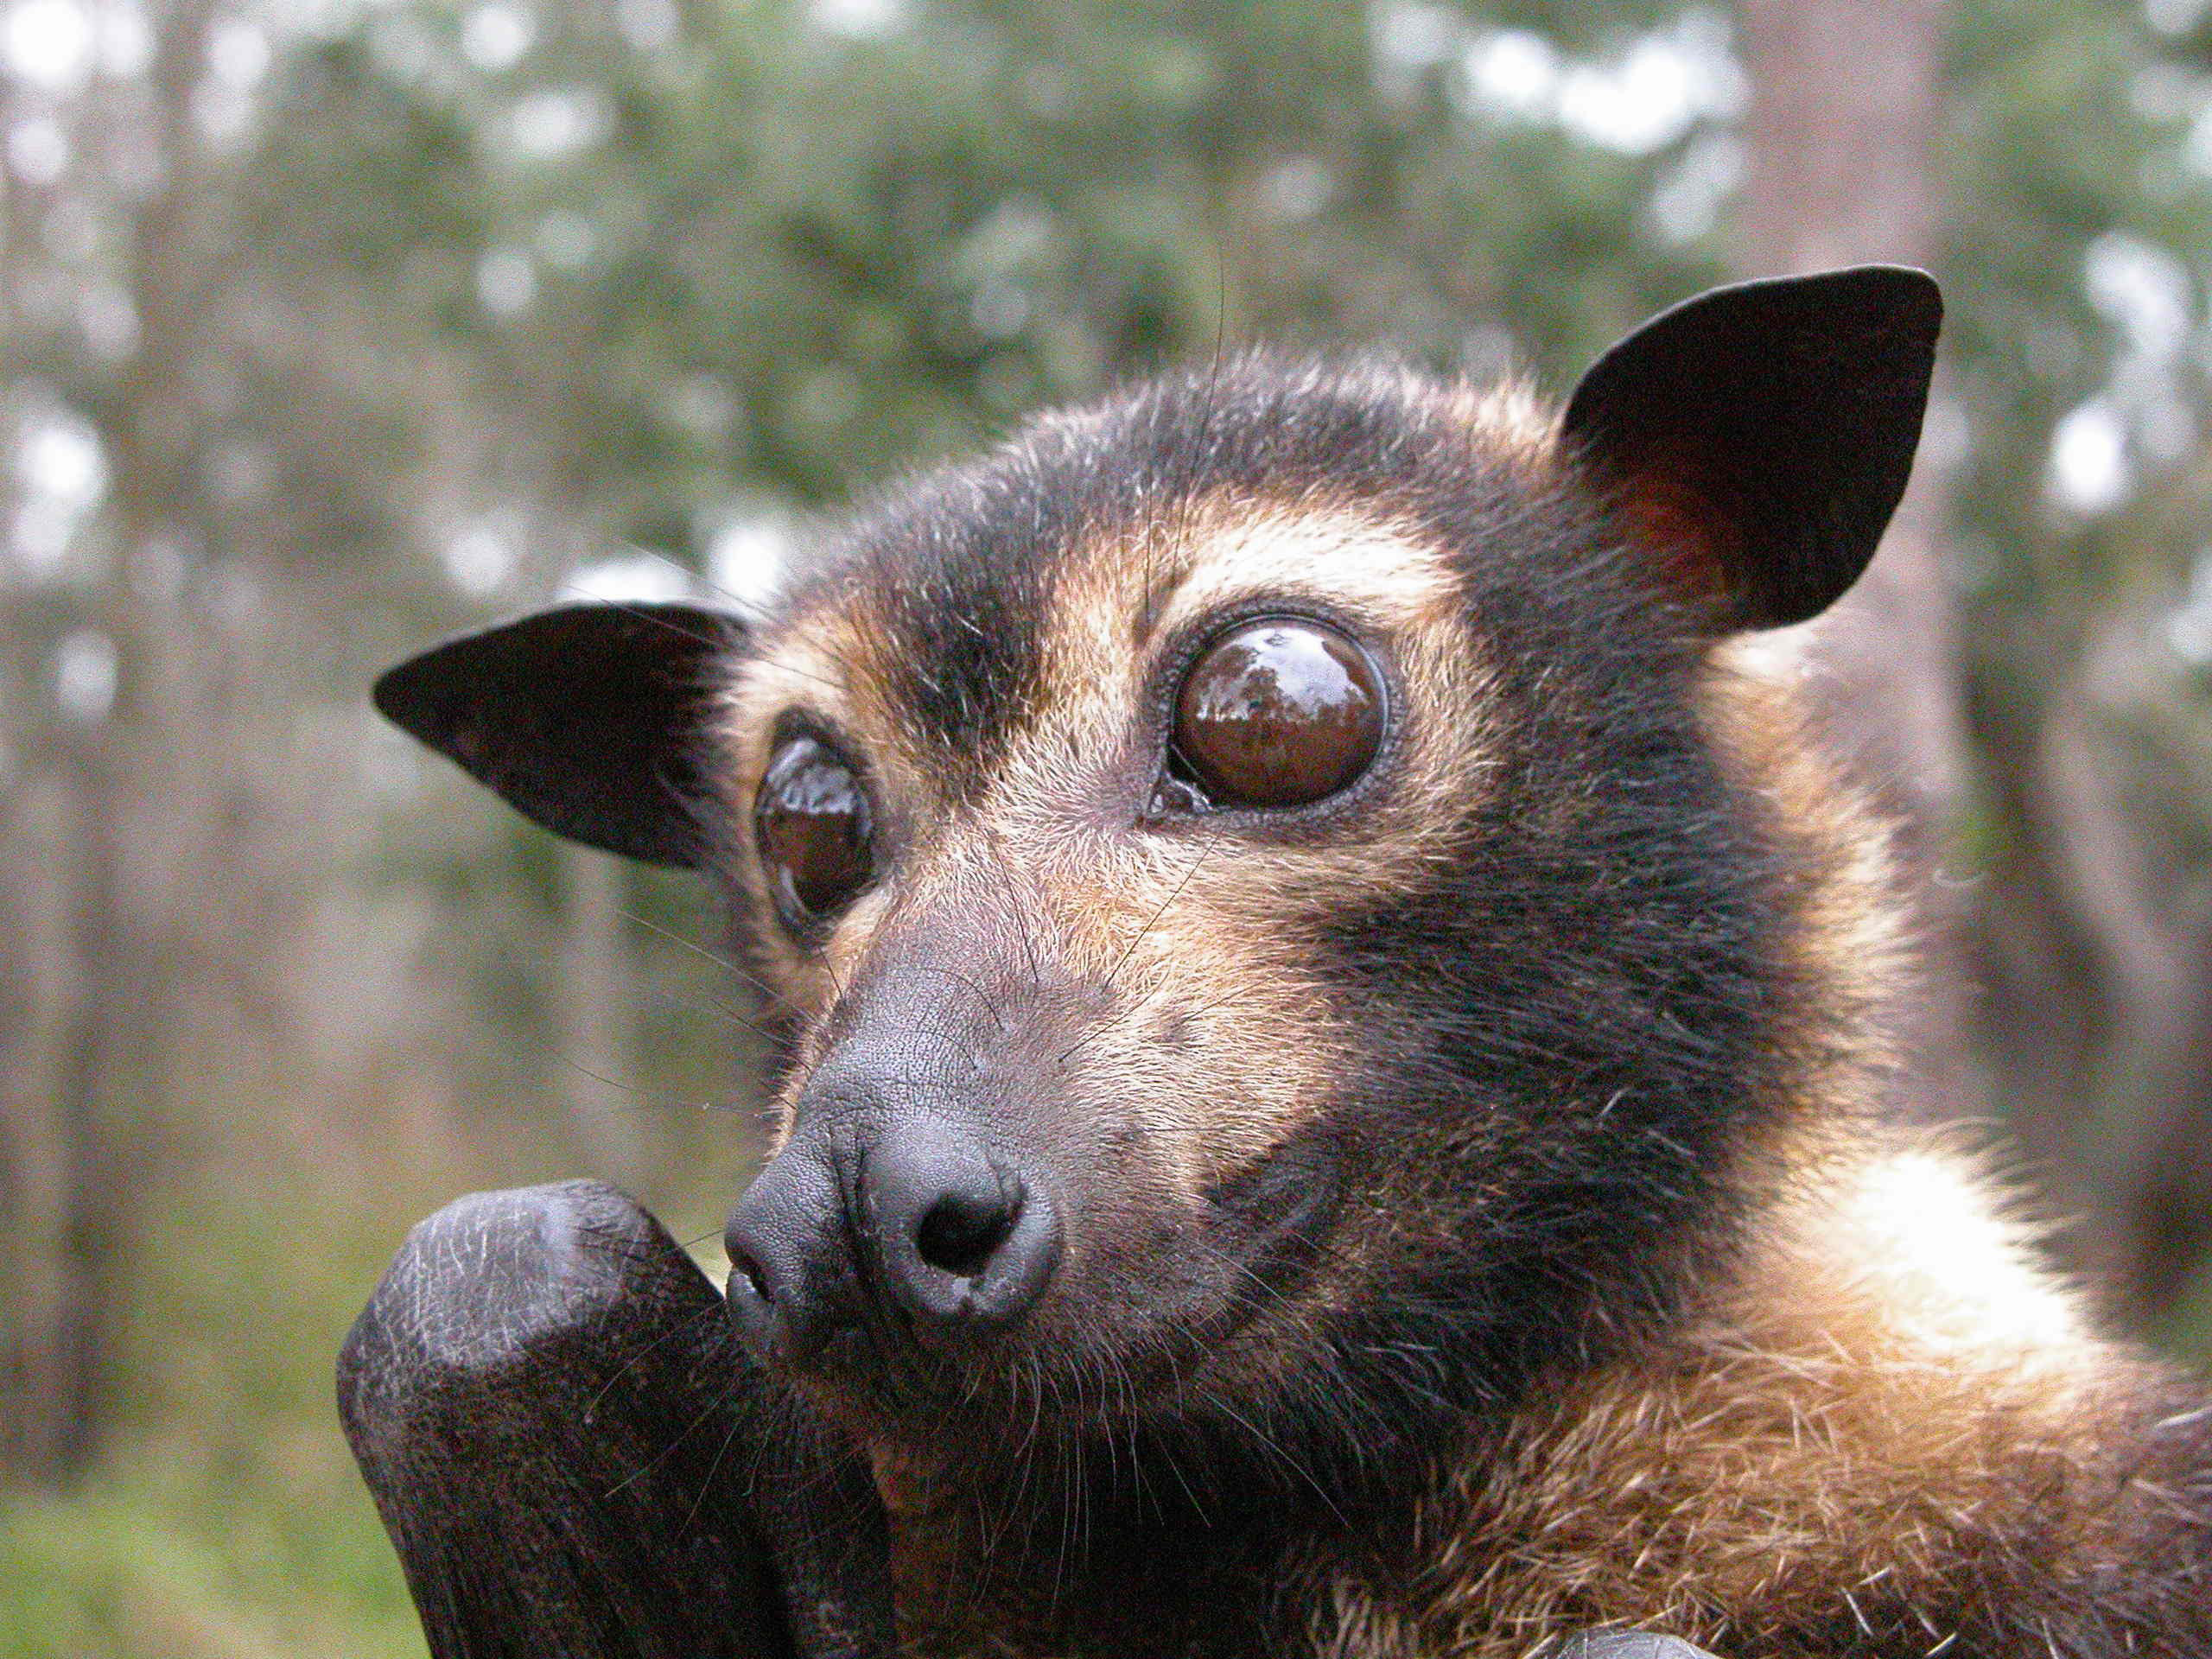 Not all bats are terrifying: The Spectacled Flying Fox is actually quite adorable.